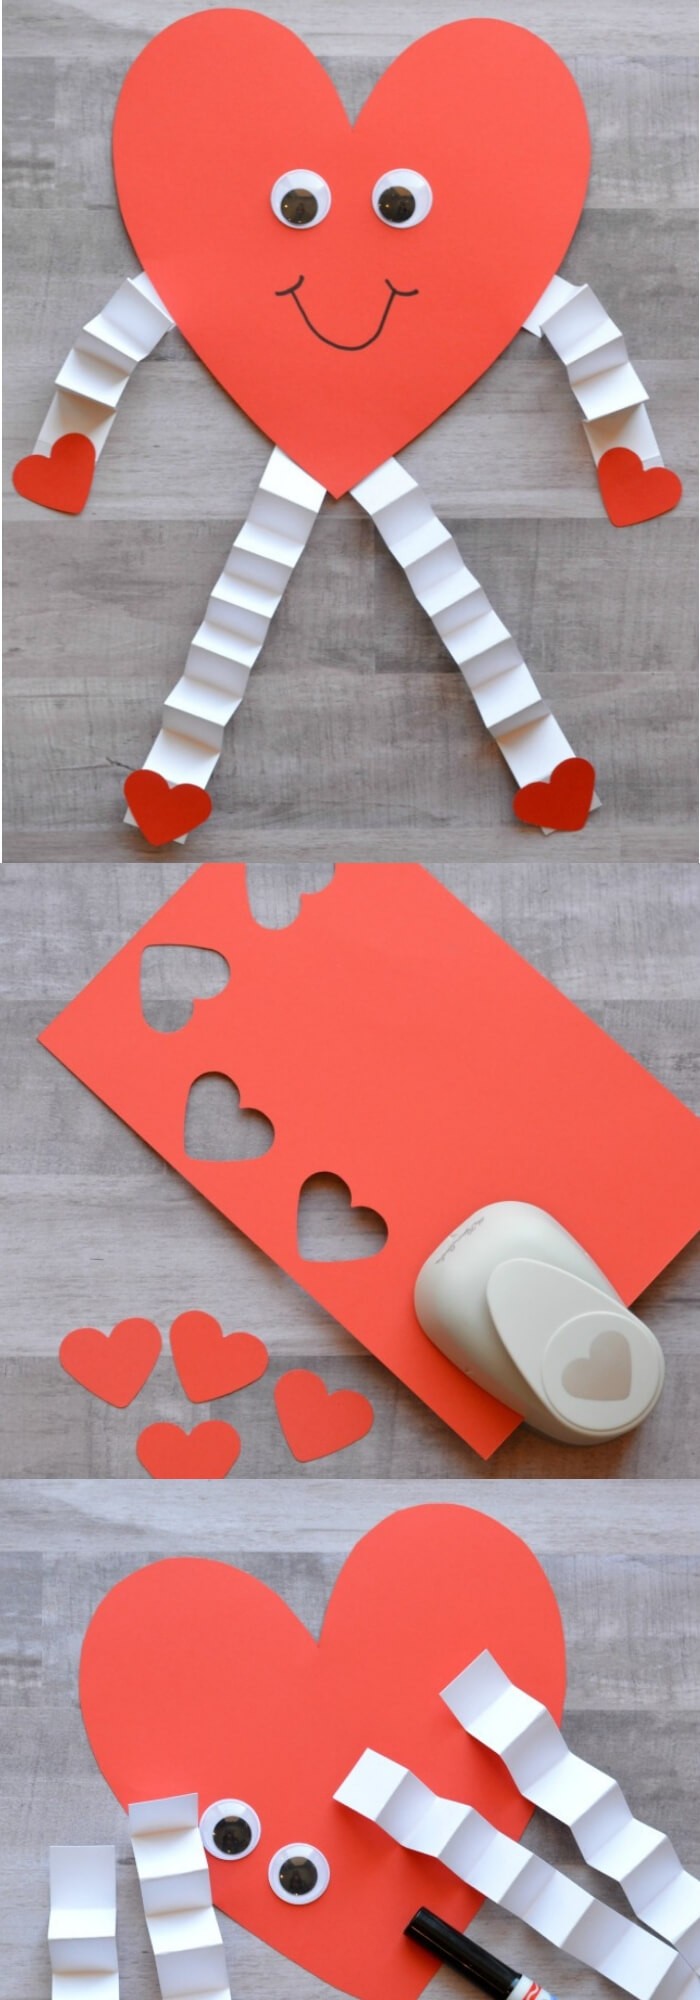 Family Friendly Valentines Day Ideas: Easy Ways To Celebrate Love With Your Children